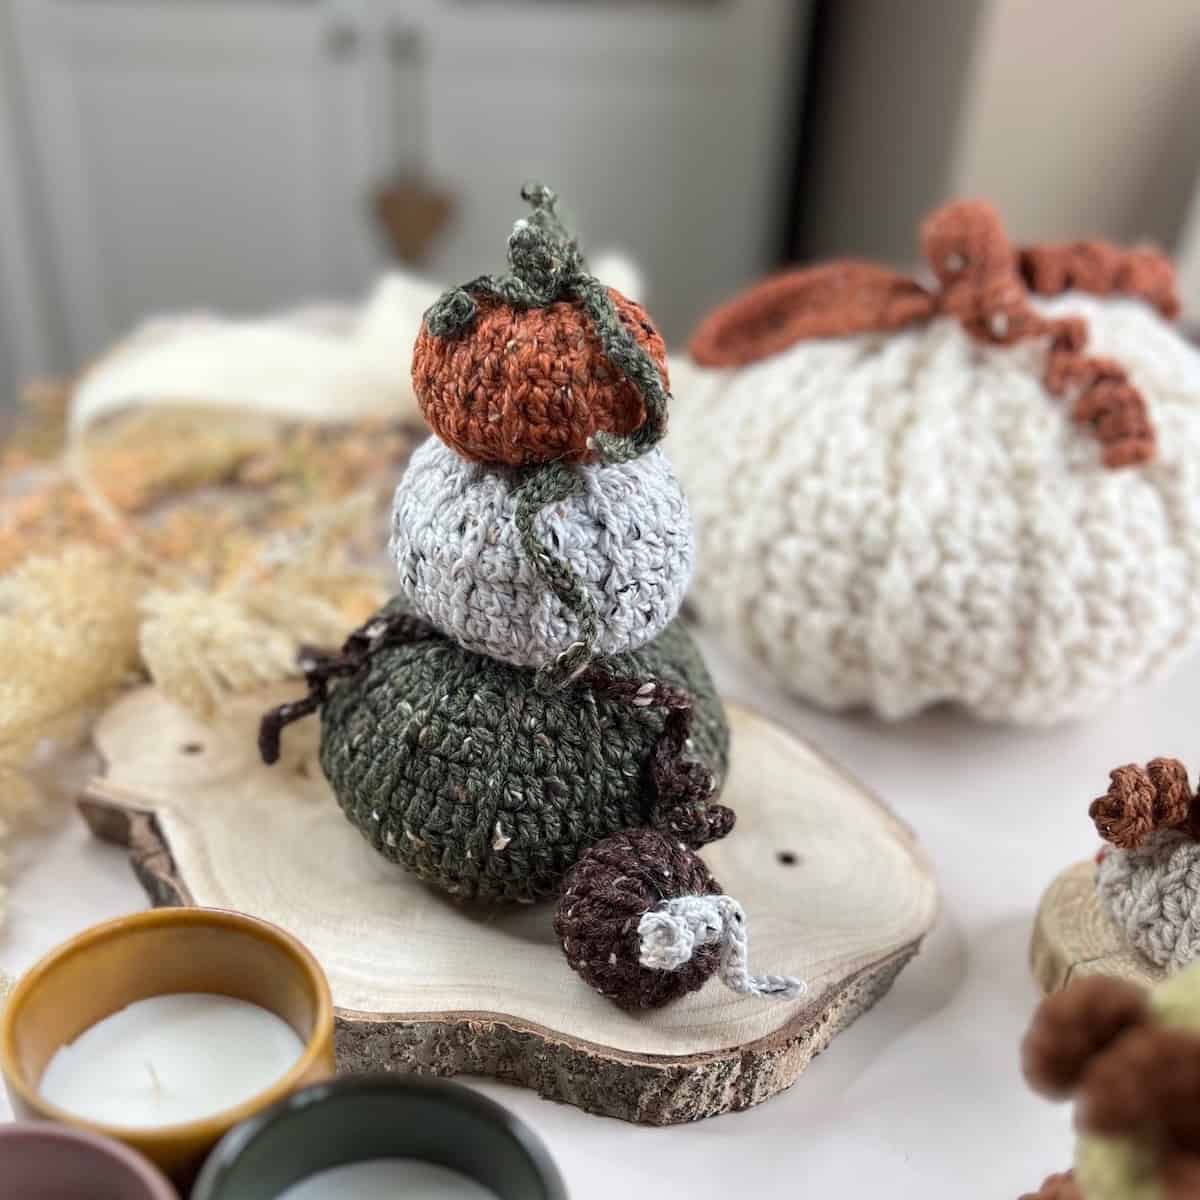 A stack of crocheted pumpkins on a wooden table.